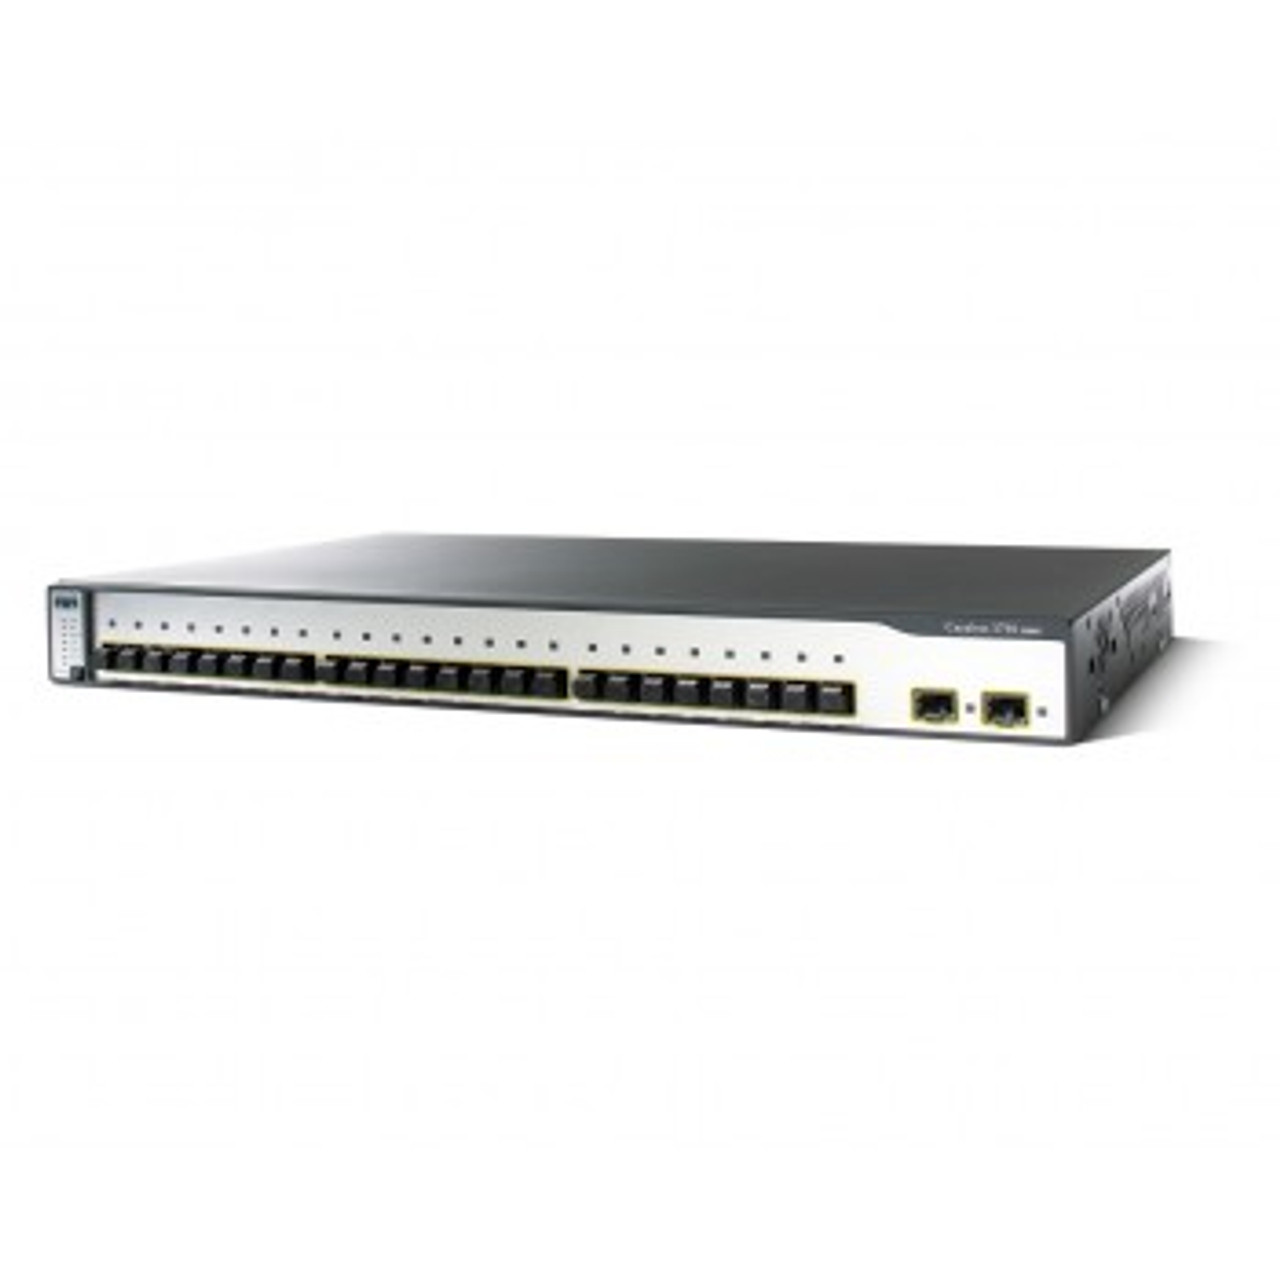 Cisco Catalyst 3750-24FS-S with 24 100BASE-FX Ethernet ports and